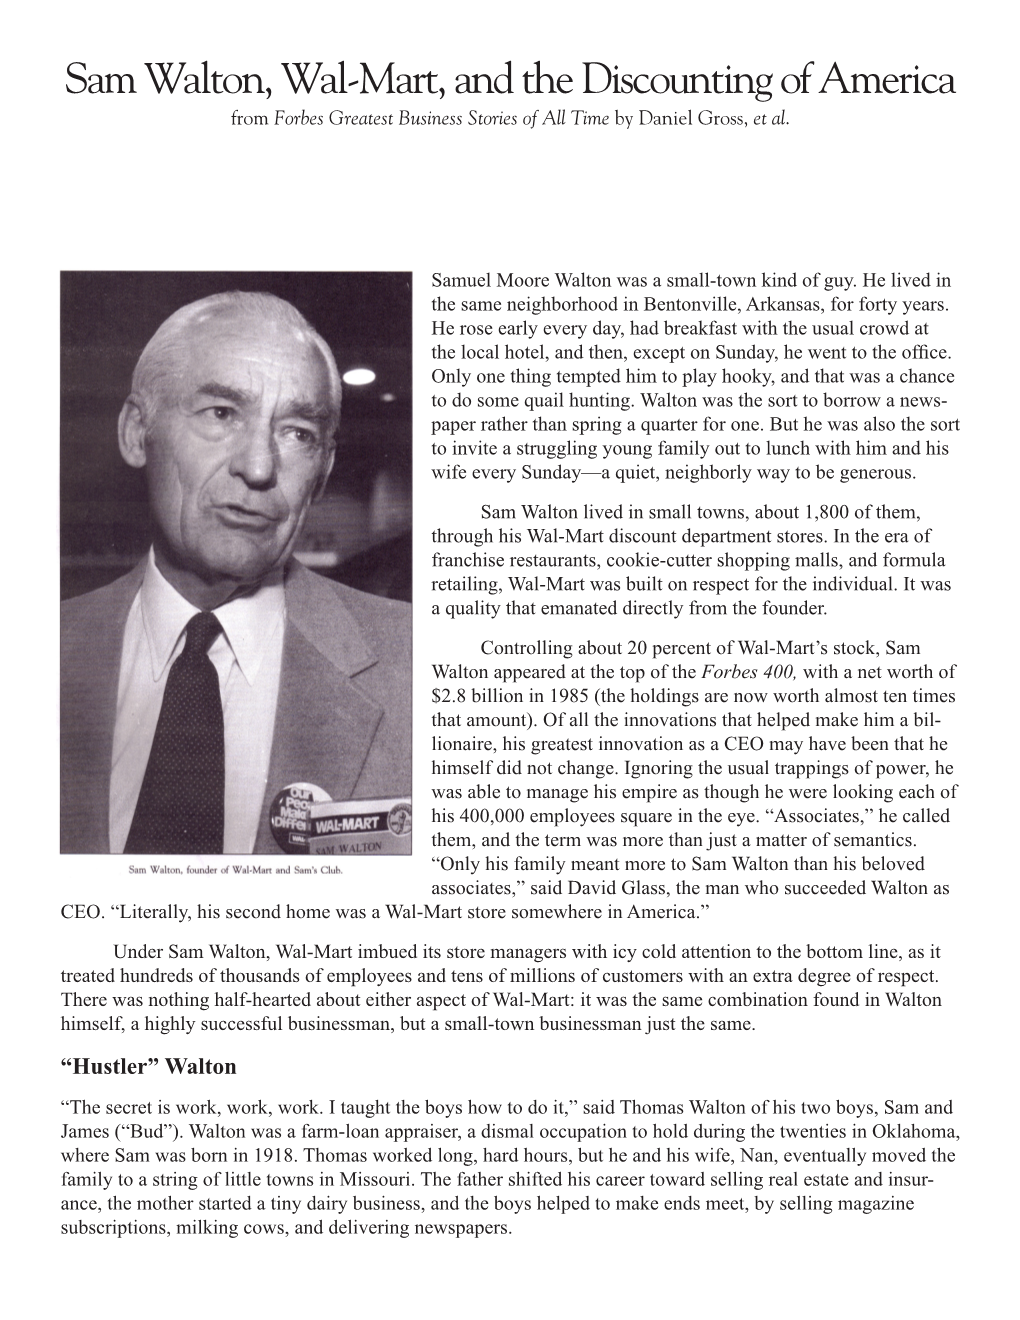 Sam Walton, Wal-Mart, and the Discounting of America from Forbes Greatest Business Stories of All Time by Daniel Gross, Et Al